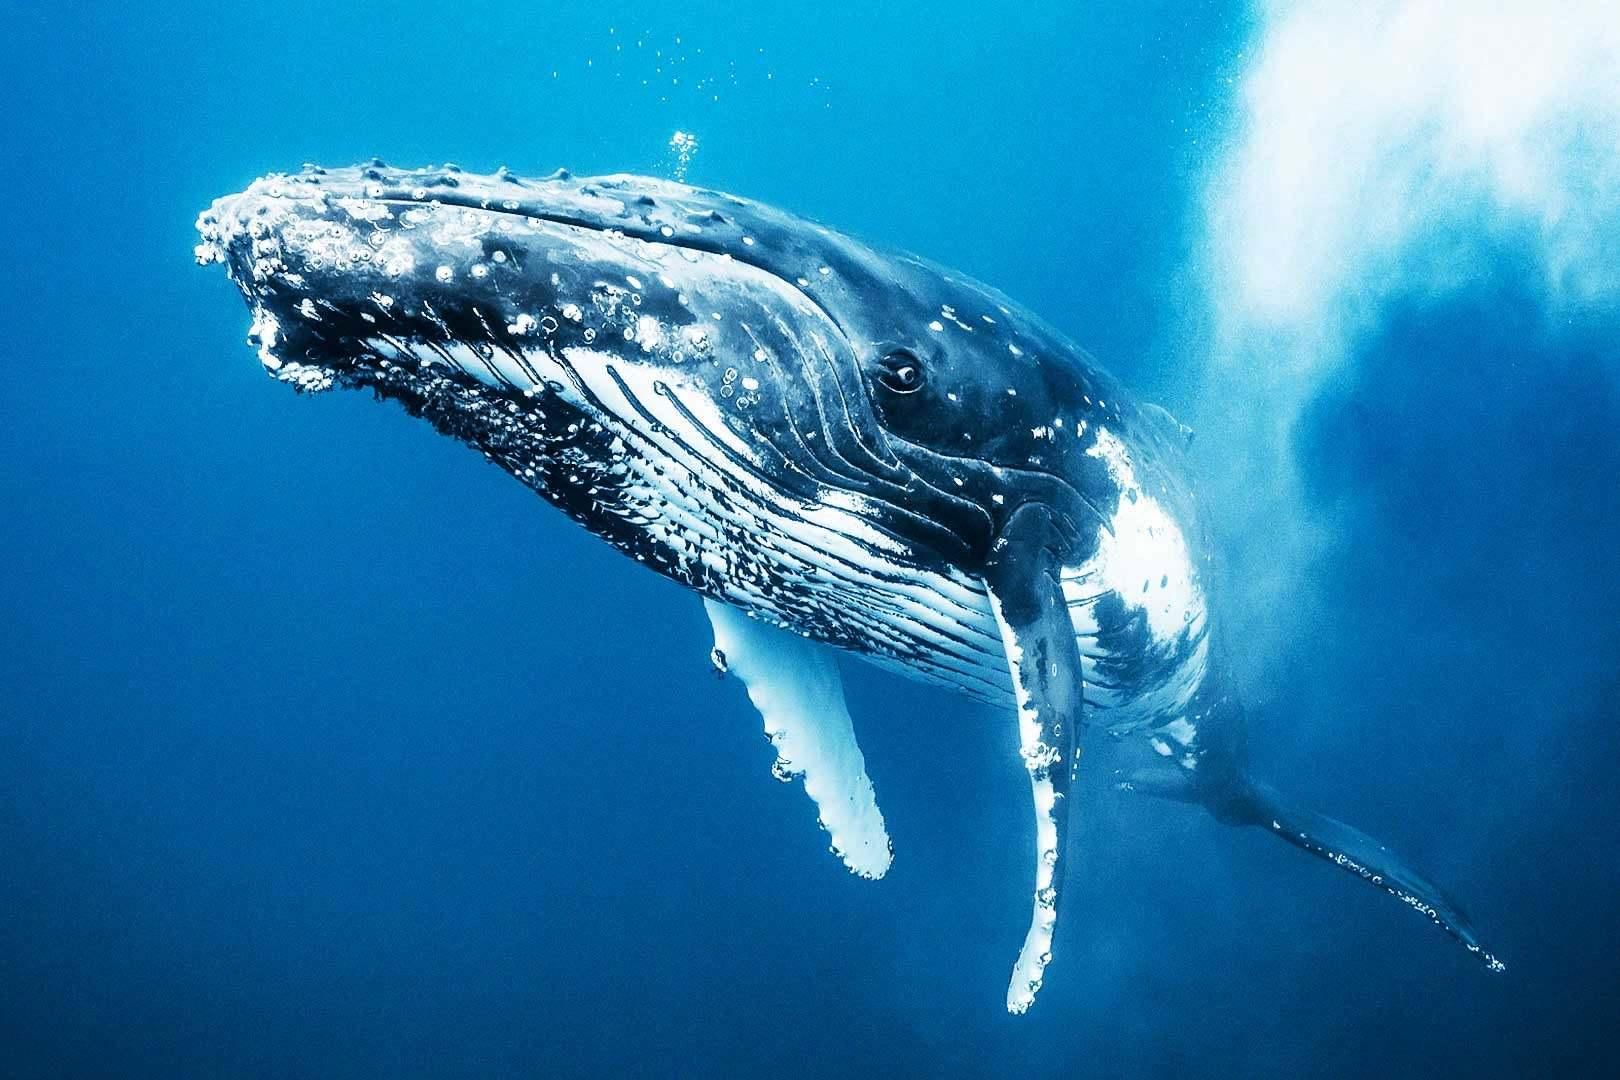 Whale population facts: 40,000 is 35% of what number?